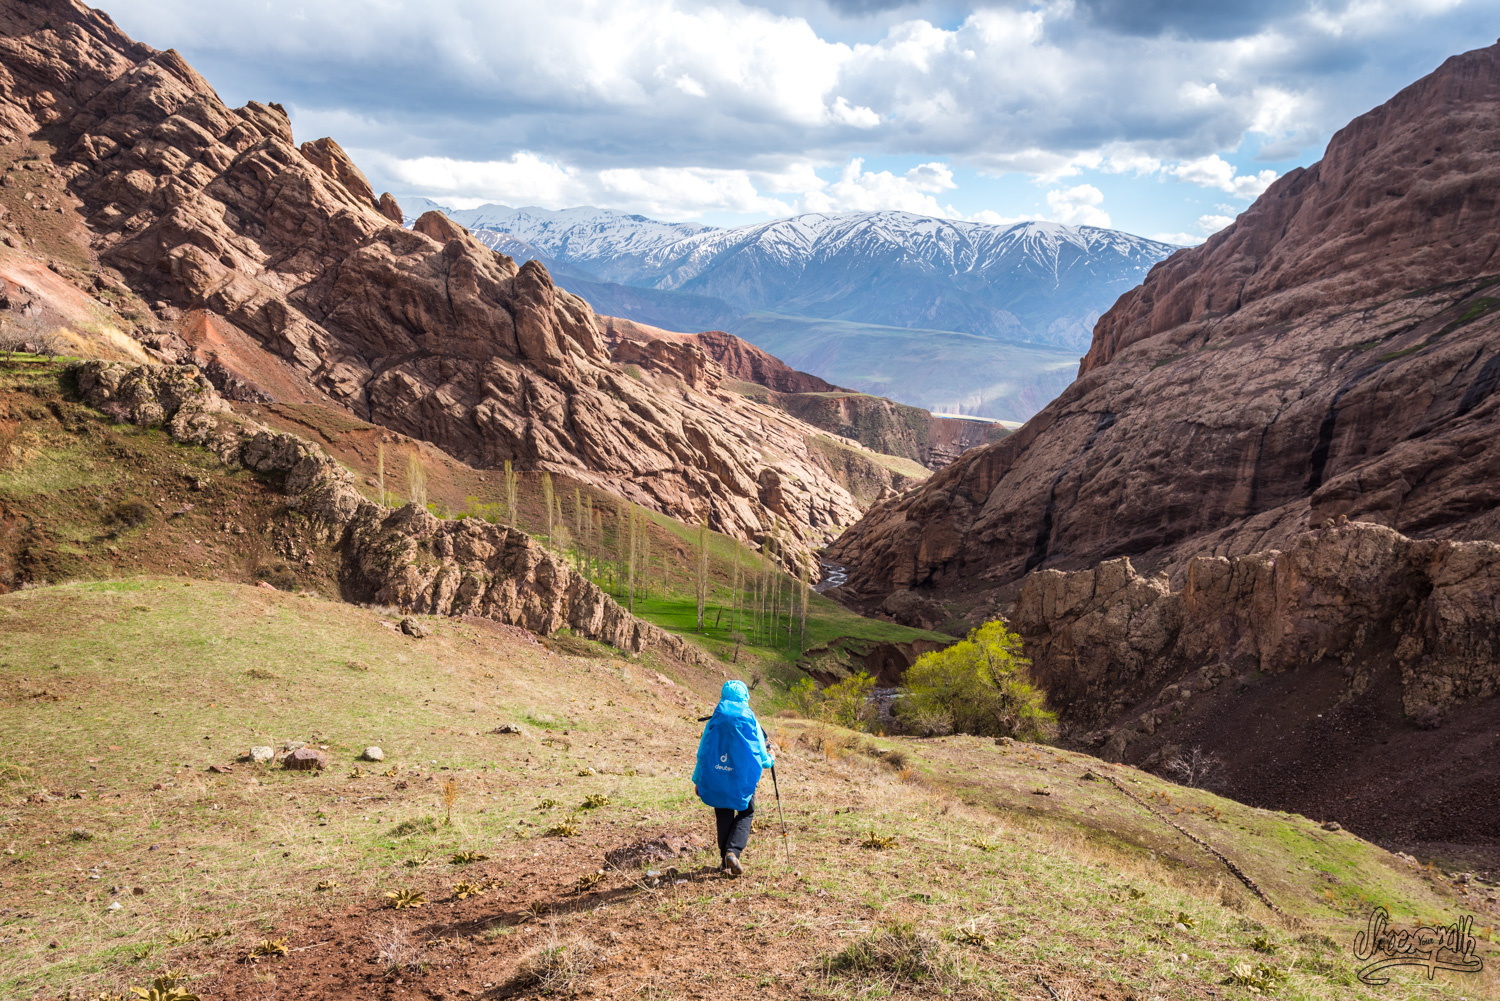 Hiking in Alamut, the valley of the assassins